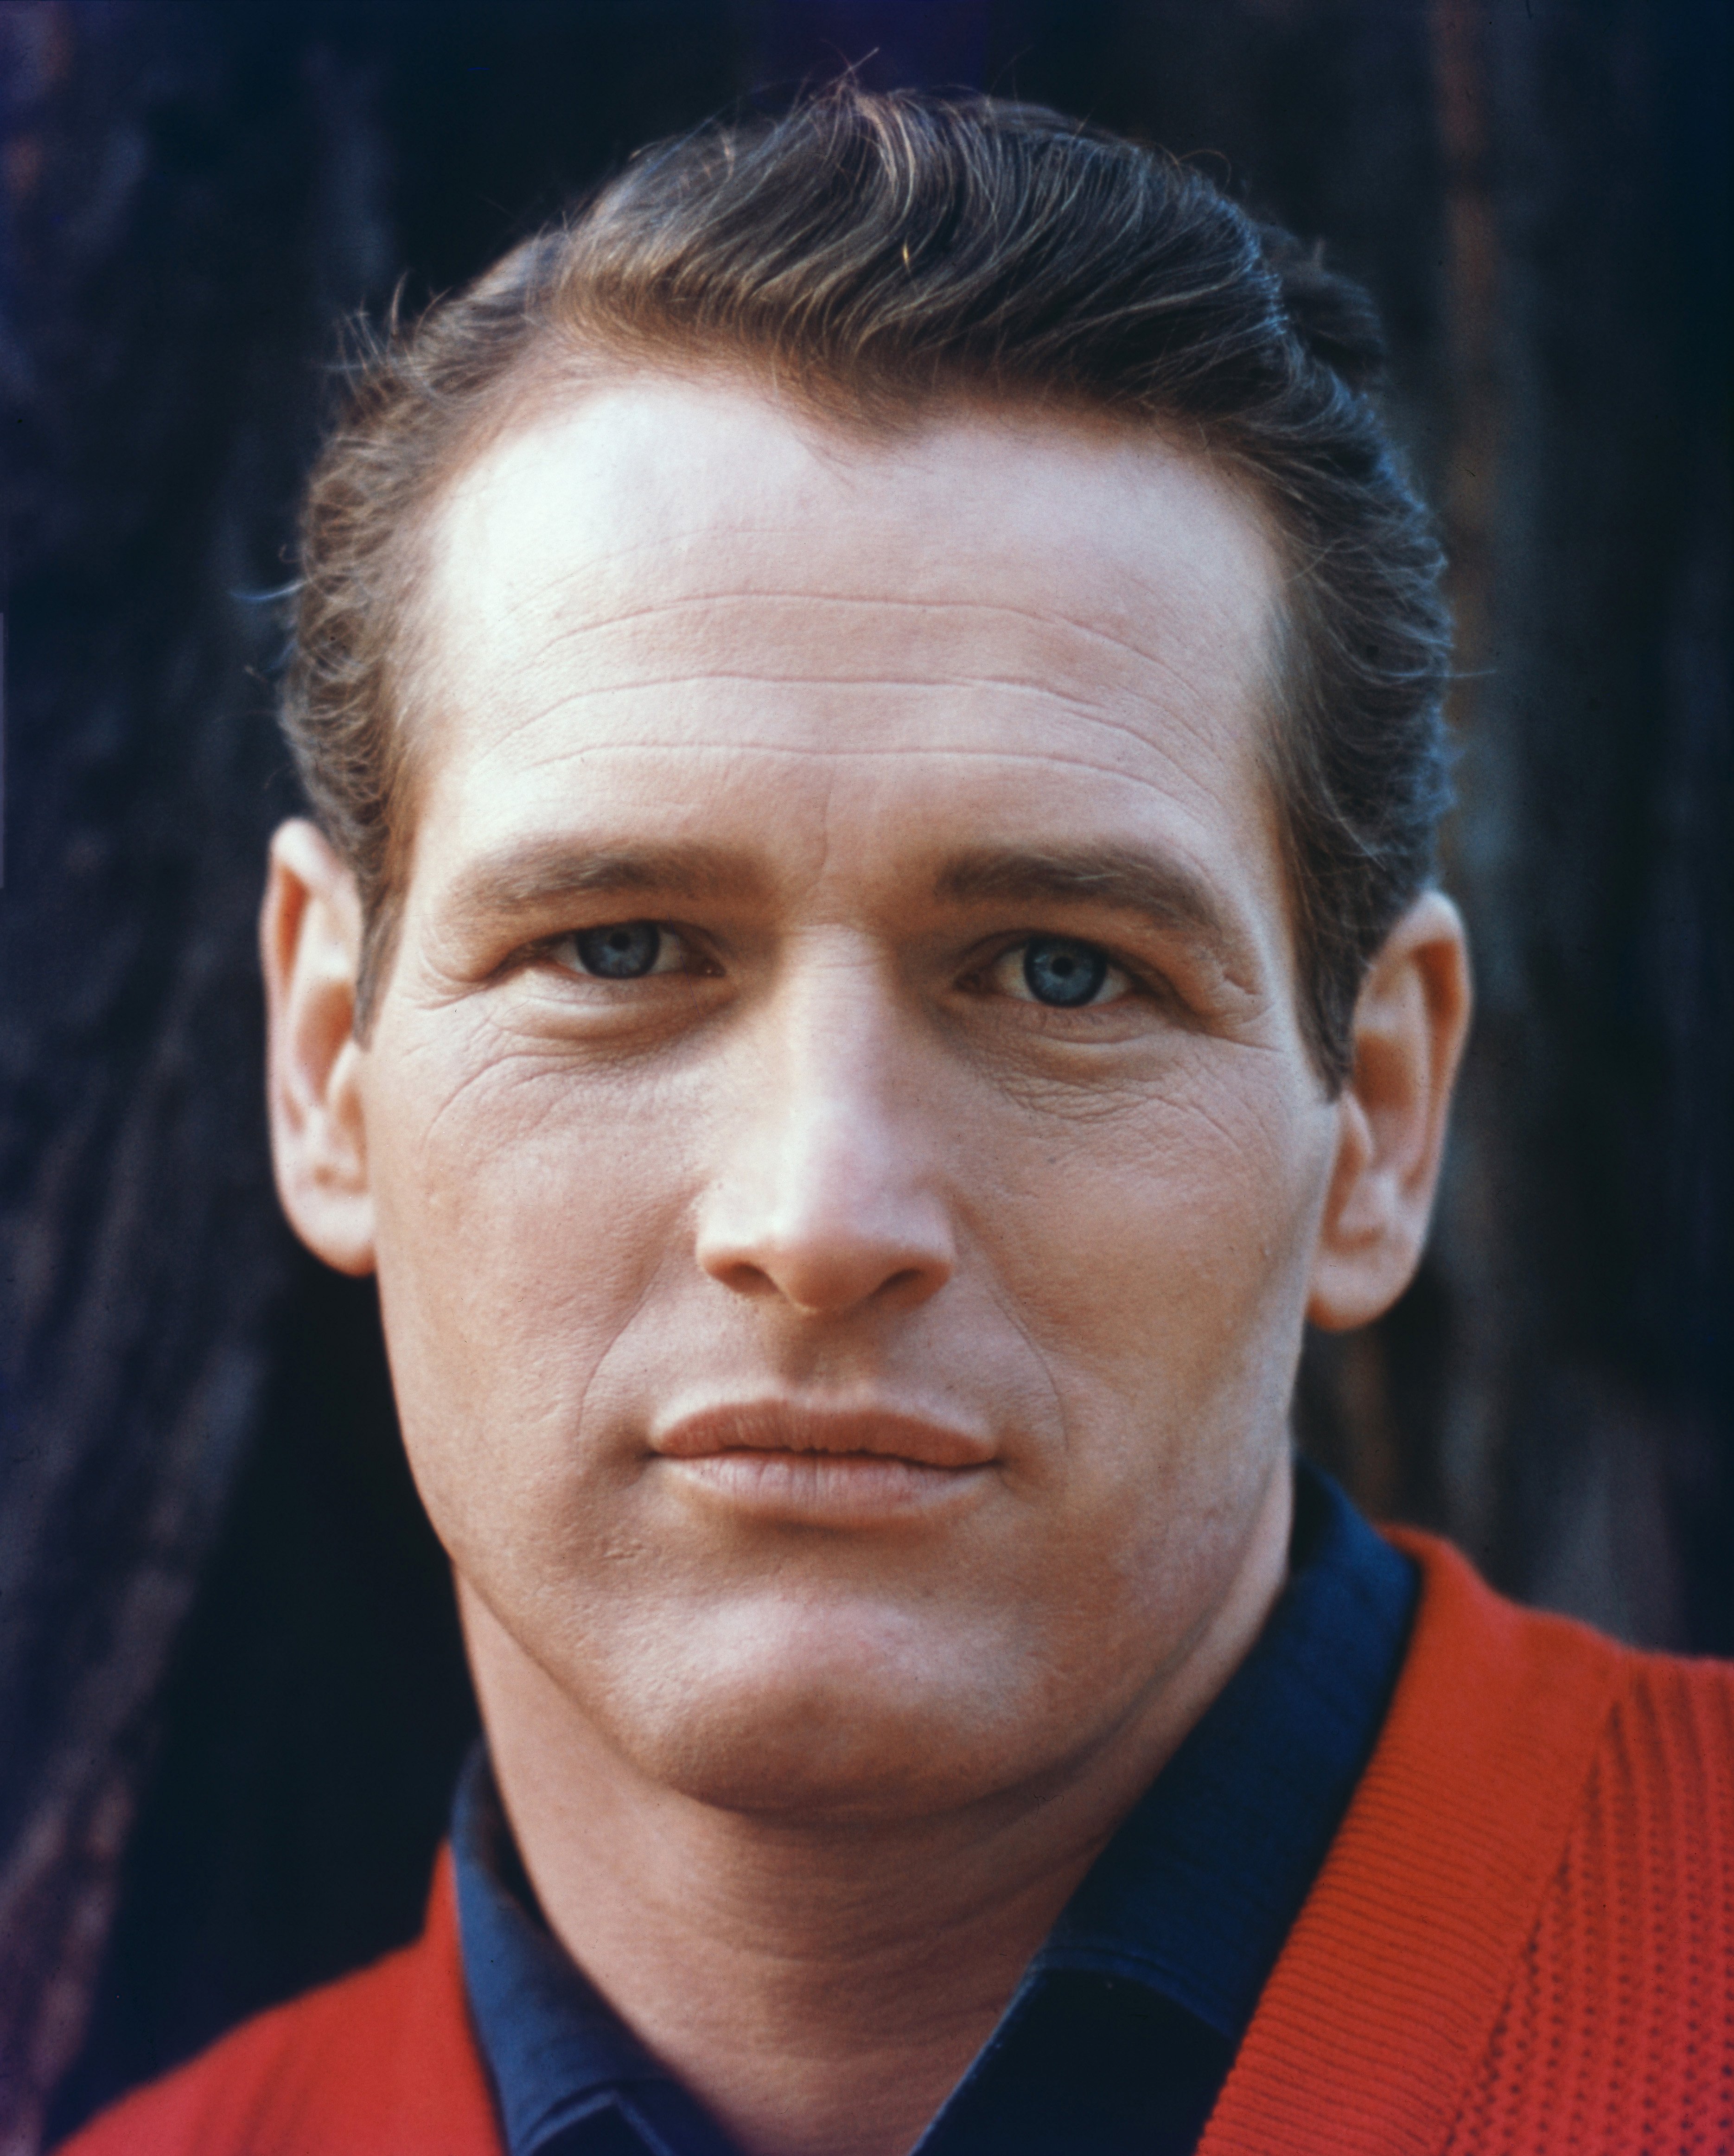 Pictured: A close-up photo of Academy Award winner Paul Newman wearing a red jersey with a blue shirt. / Source: Getty Images